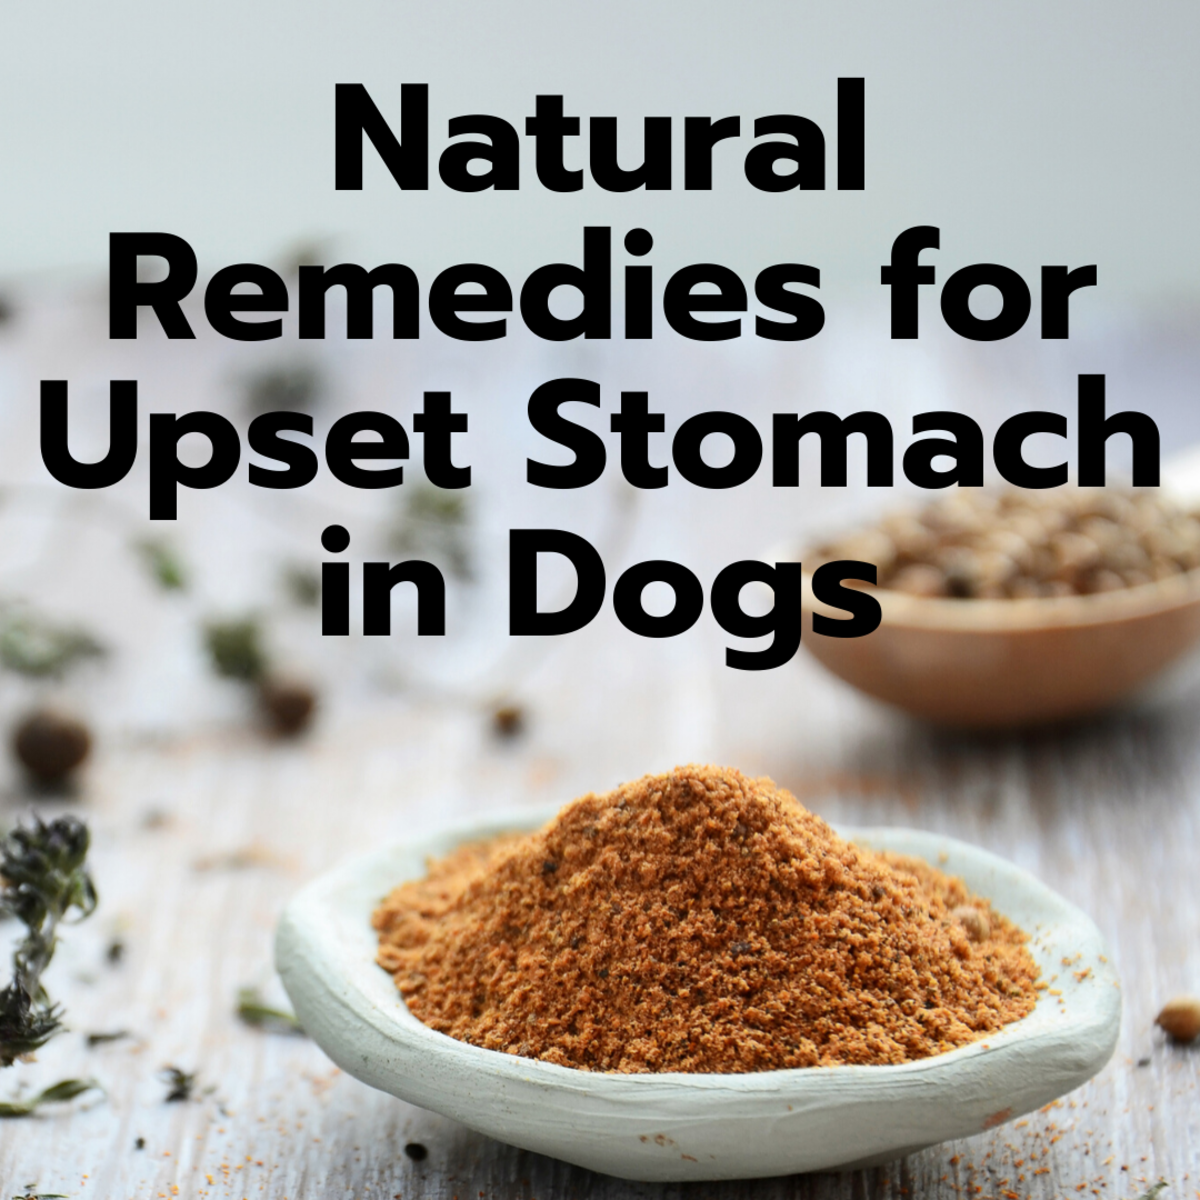 8 Easy Home Remedies for a Dog